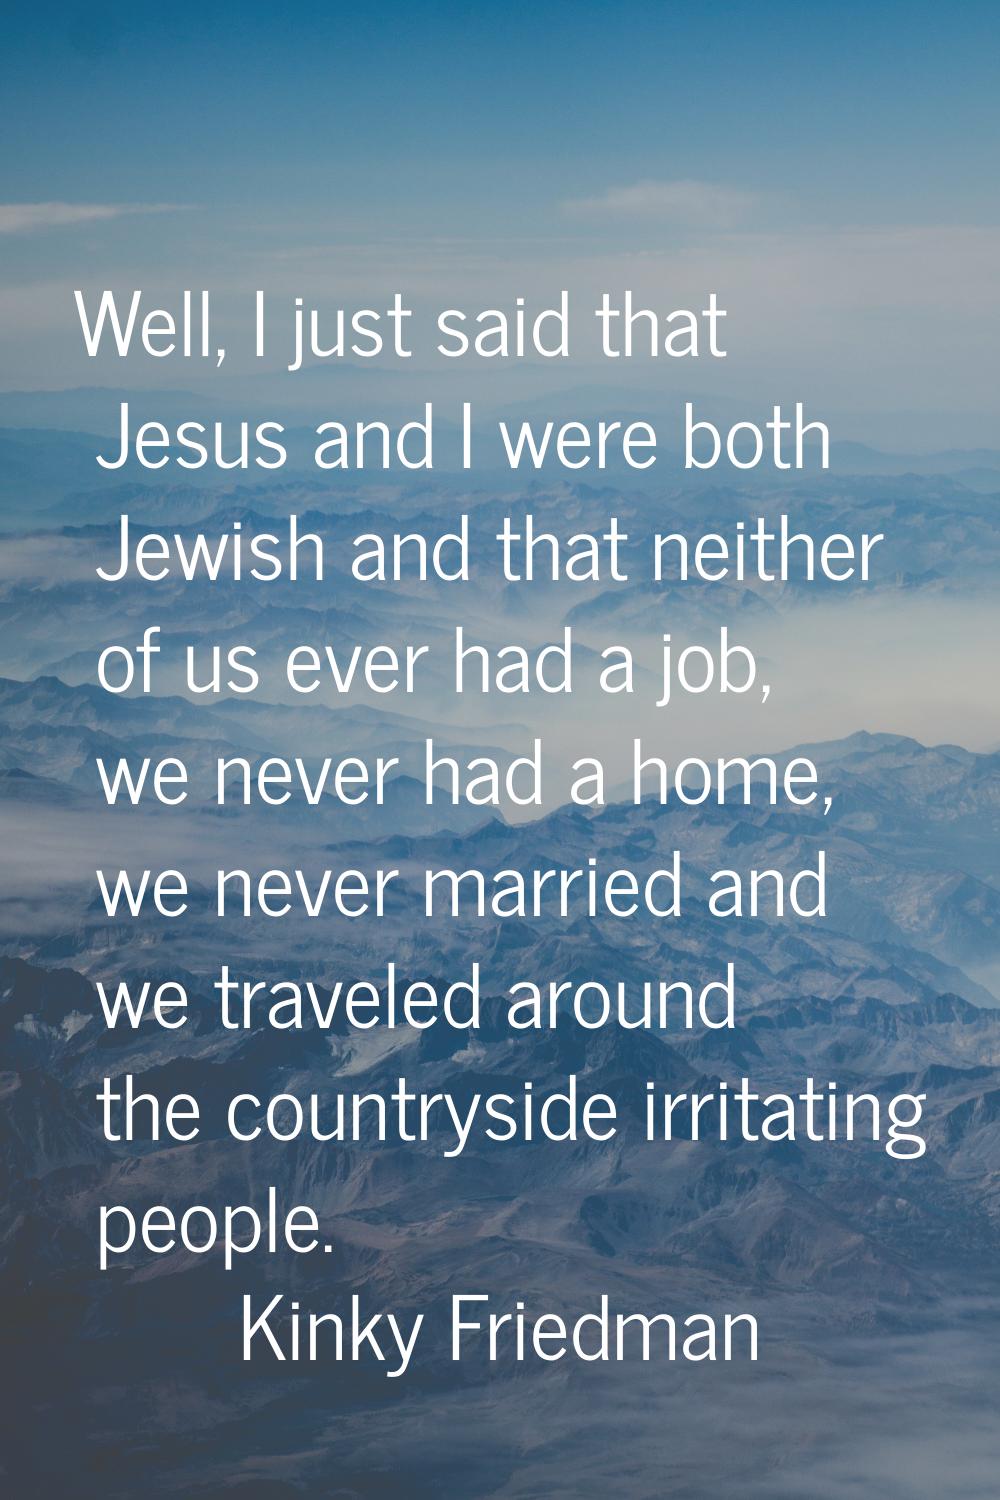 Well, I just said that Jesus and I were both Jewish and that neither of us ever had a job, we never